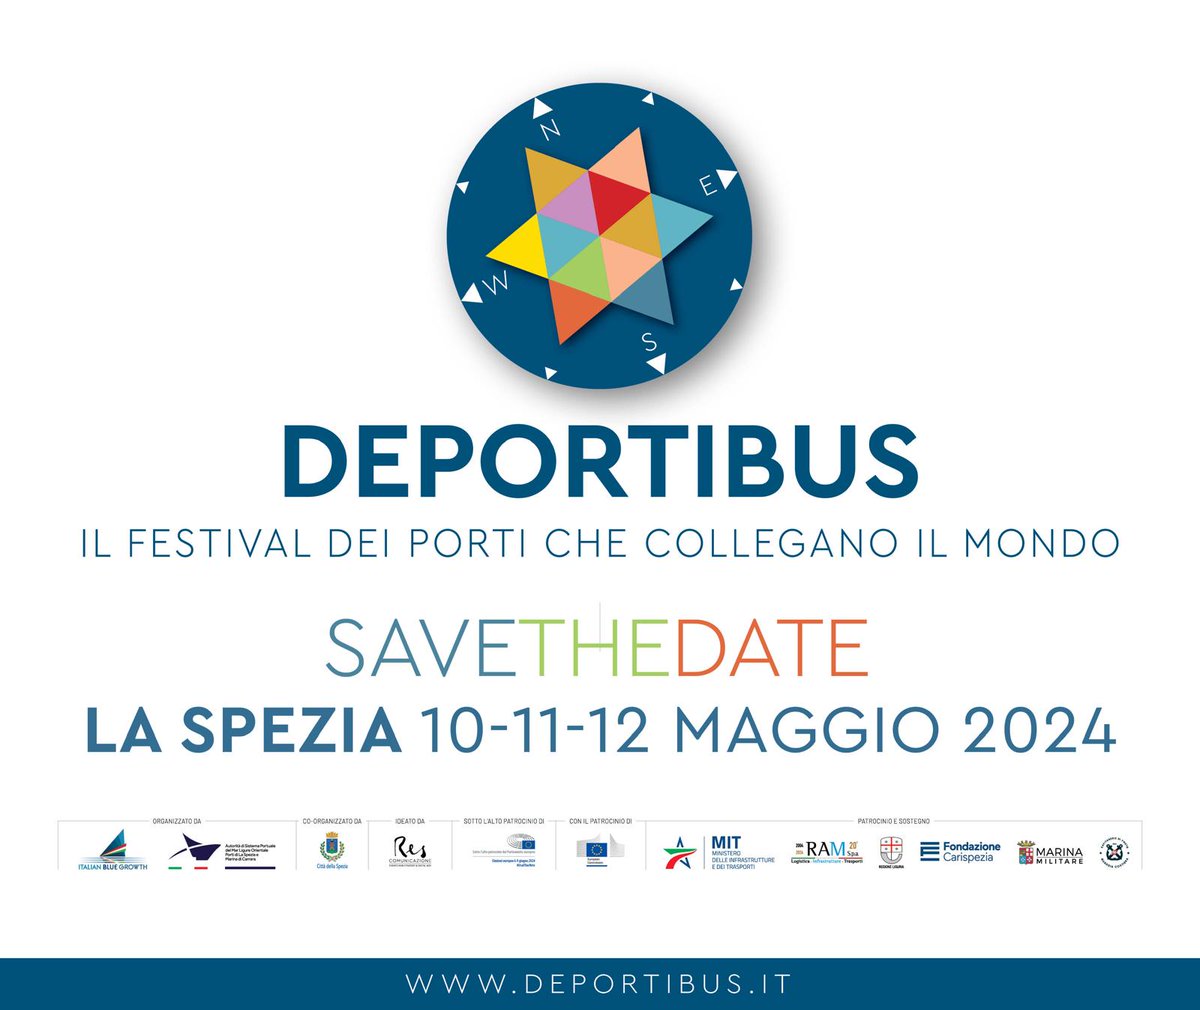 Save the date! LaSpezia, Italy will host #DEPORTIBUS: the 1st #European festival focused on the crucial role of ports With a.o. professional, institutional, cultural and culinary port-related events throughout the city 🗓️May 10-12, 2024 Info👉shorturl.at/agp23